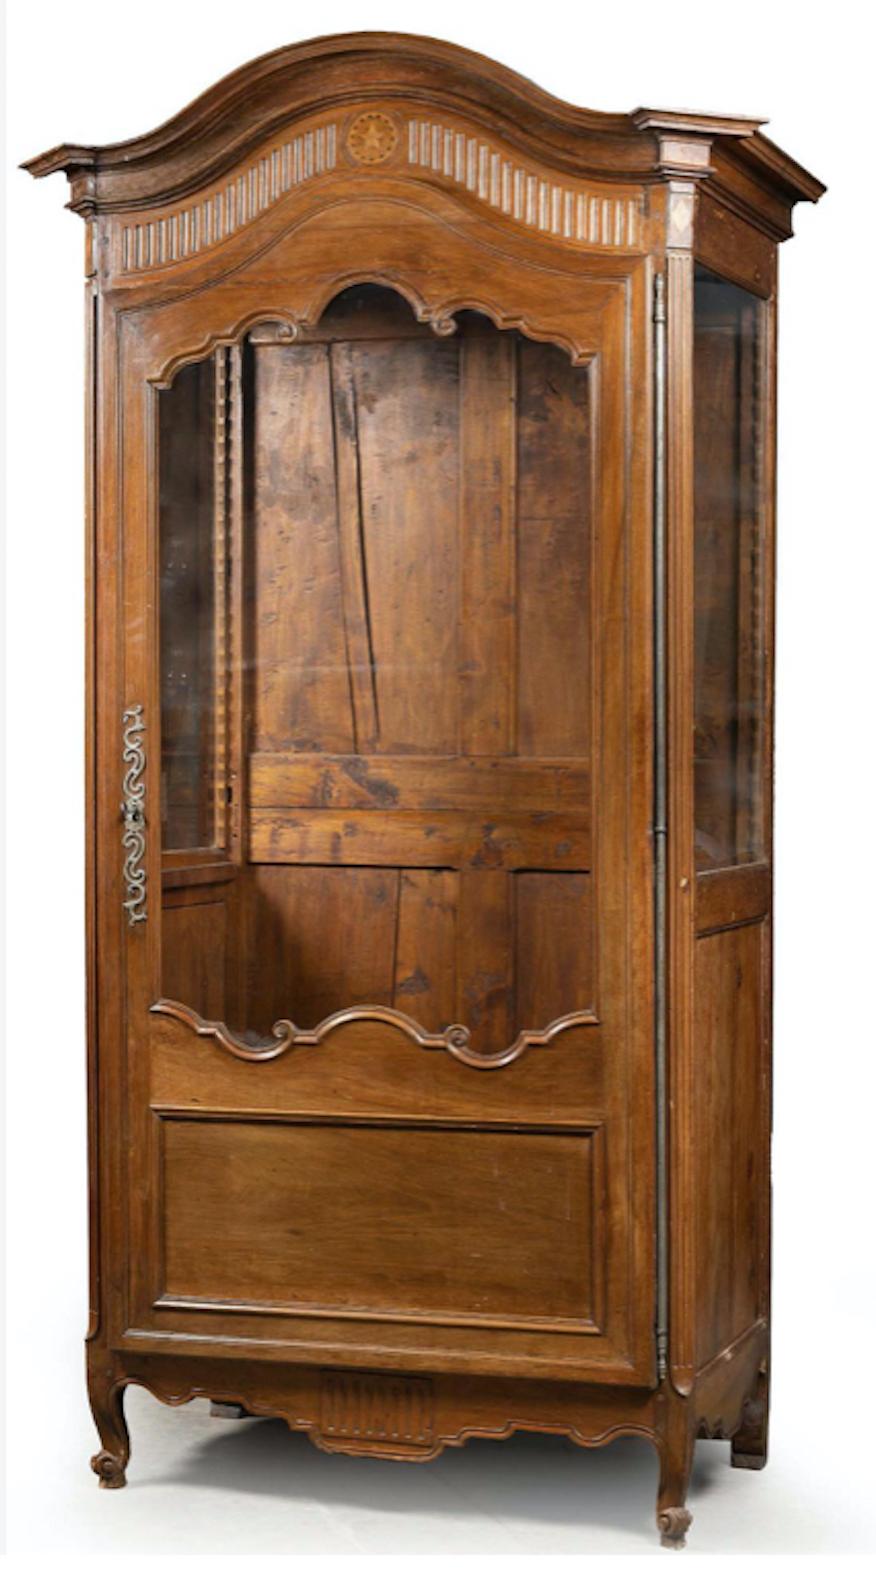 19th Century French grand vitrine or wardrobe made in fine hand carved walnut wood in provincial style. Very good and stable condition with no restorations made so far. Original glass door and glass sides.
France, circa 1860